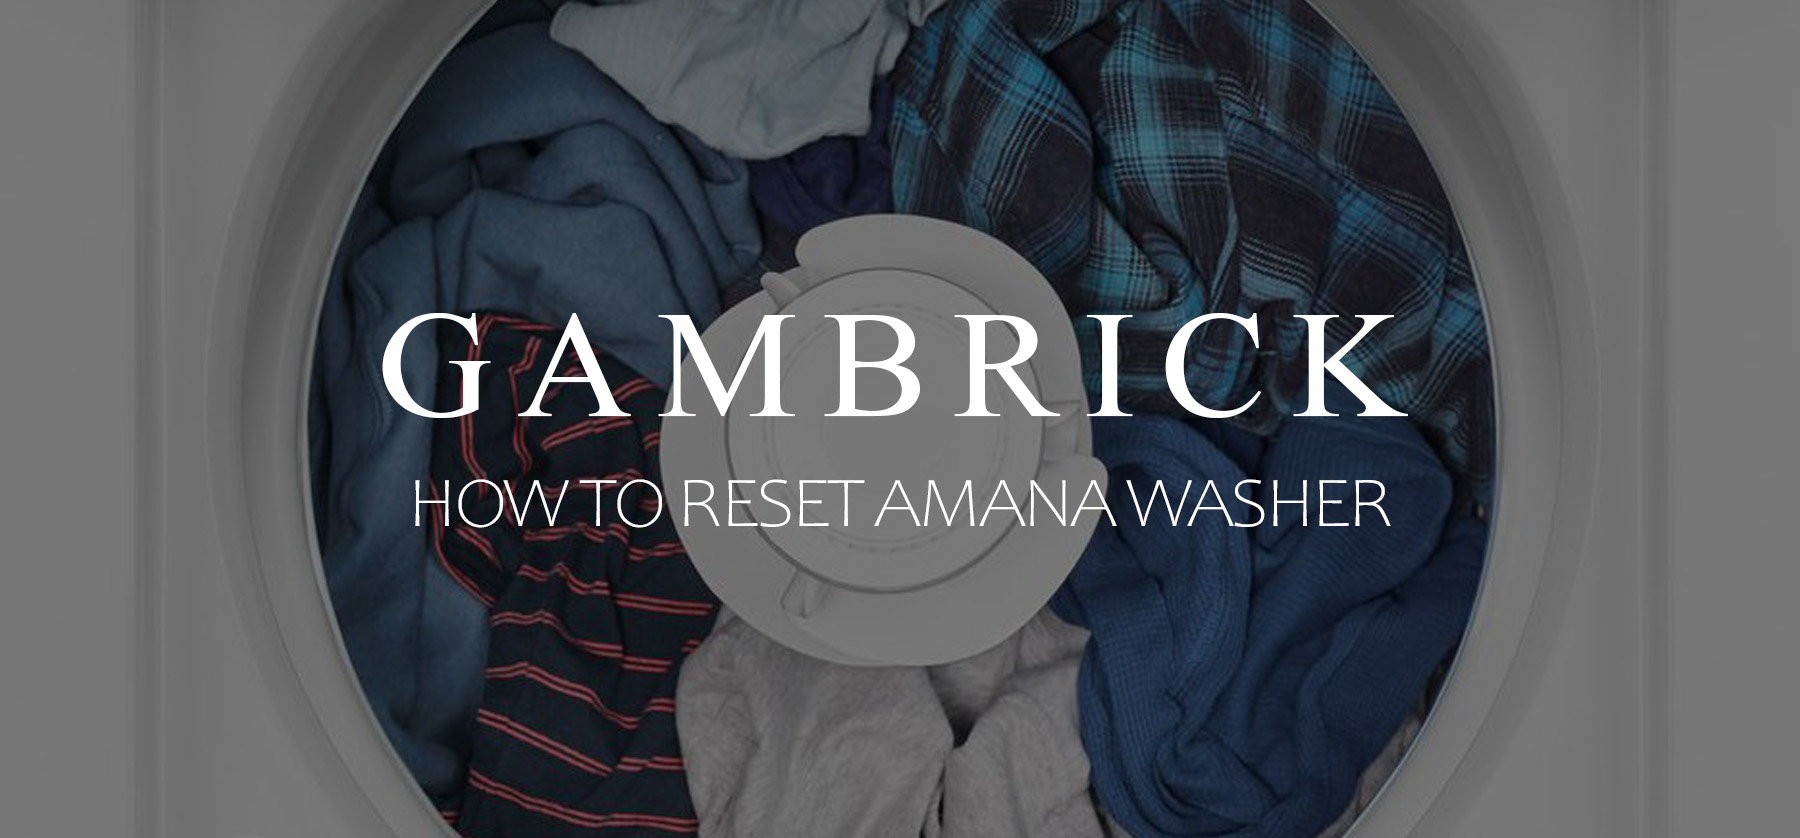 how to reset Amana Washer banner 1.1